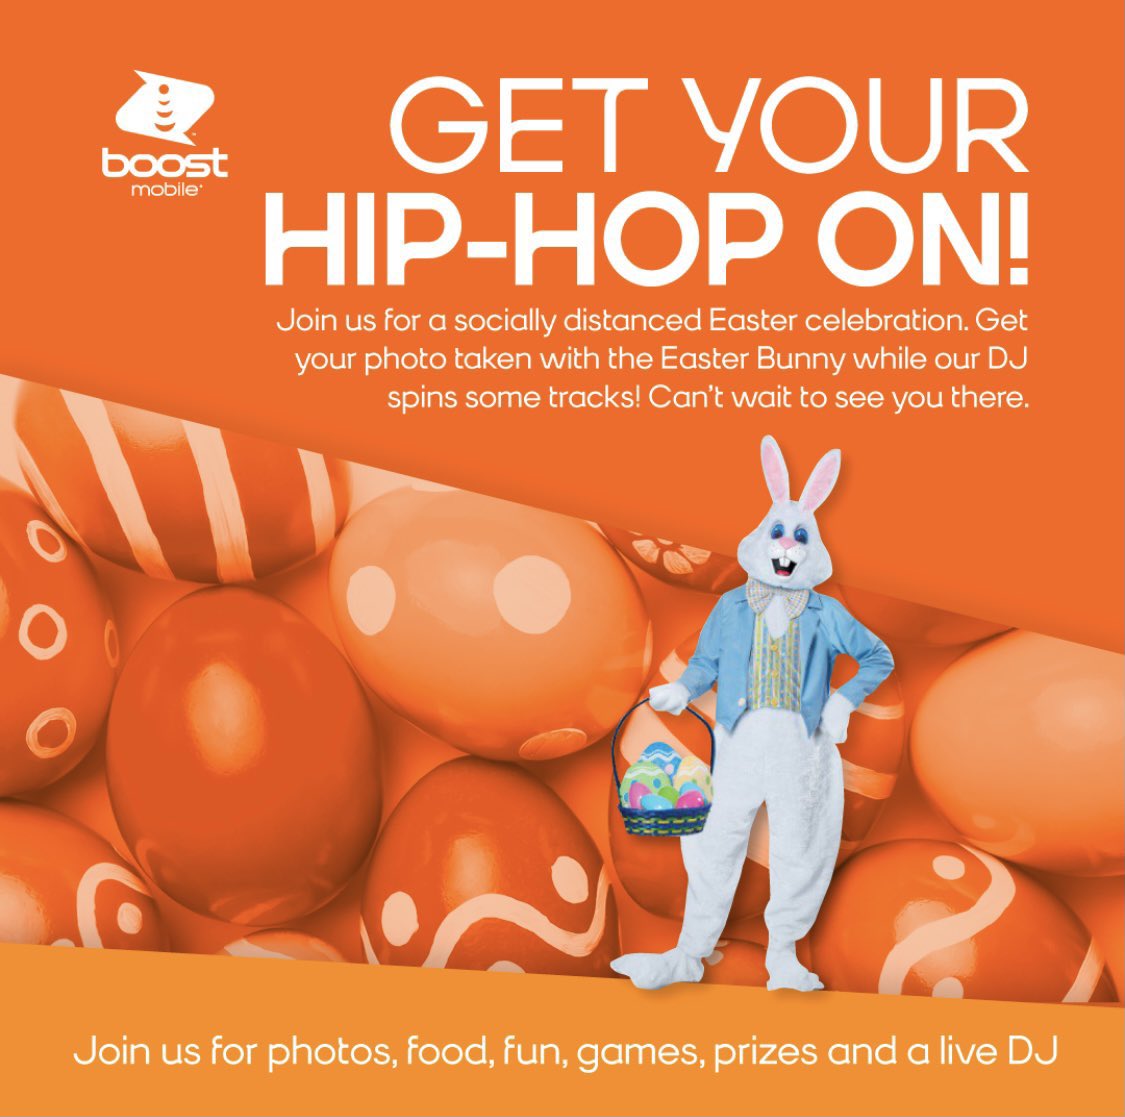 @OssiningChamber @OssiningPolice @OssiningFire @OssiningSchools Come visit @BPowertel 152 S highland Ave this Saturday (3/13) from 1-5pm to meet the Easter bunny and some great offers from #boostmobile no activation fees and free giveaways!